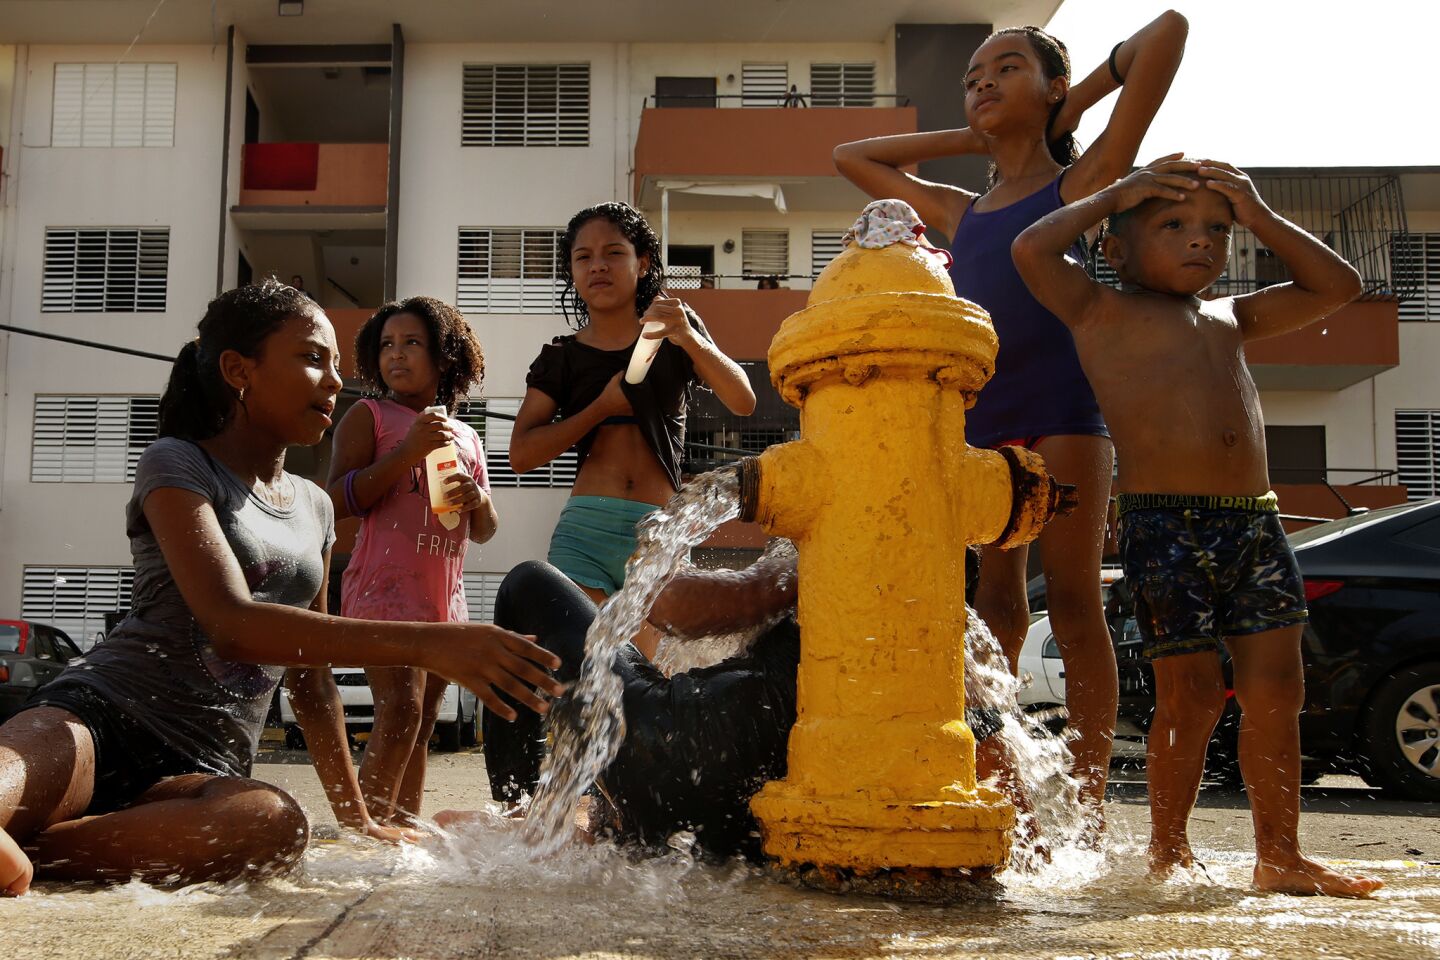 Children bath with the water from a fire hydrant in a public housing project in San Juan. Residents are still trying to get the basics of food, water, gas, and money from banks.